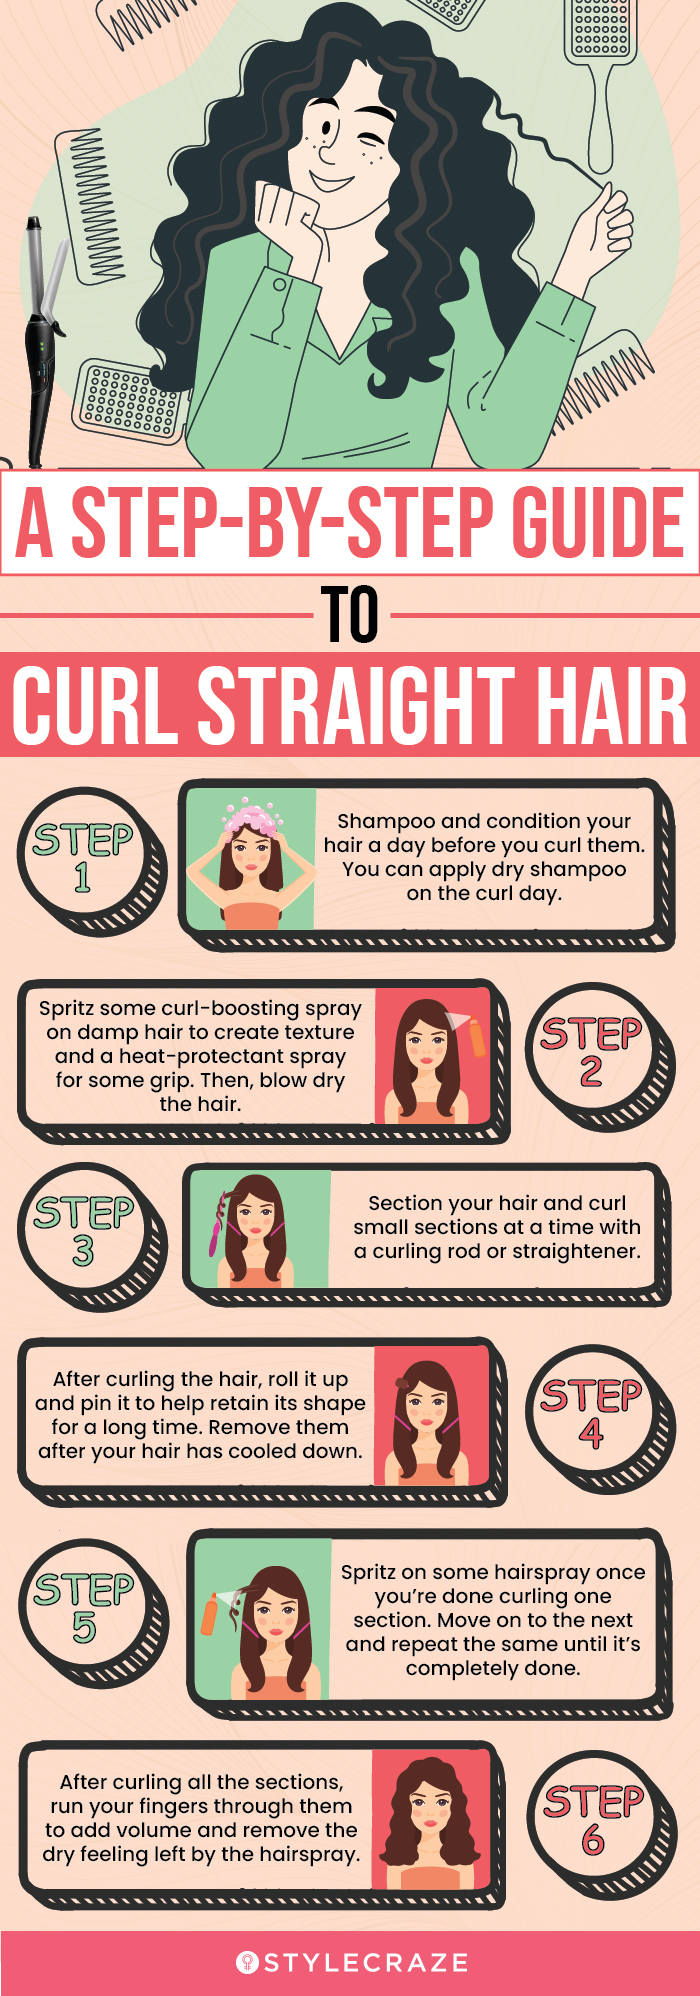 a stepbystep guide to curl straight hair (infographic)